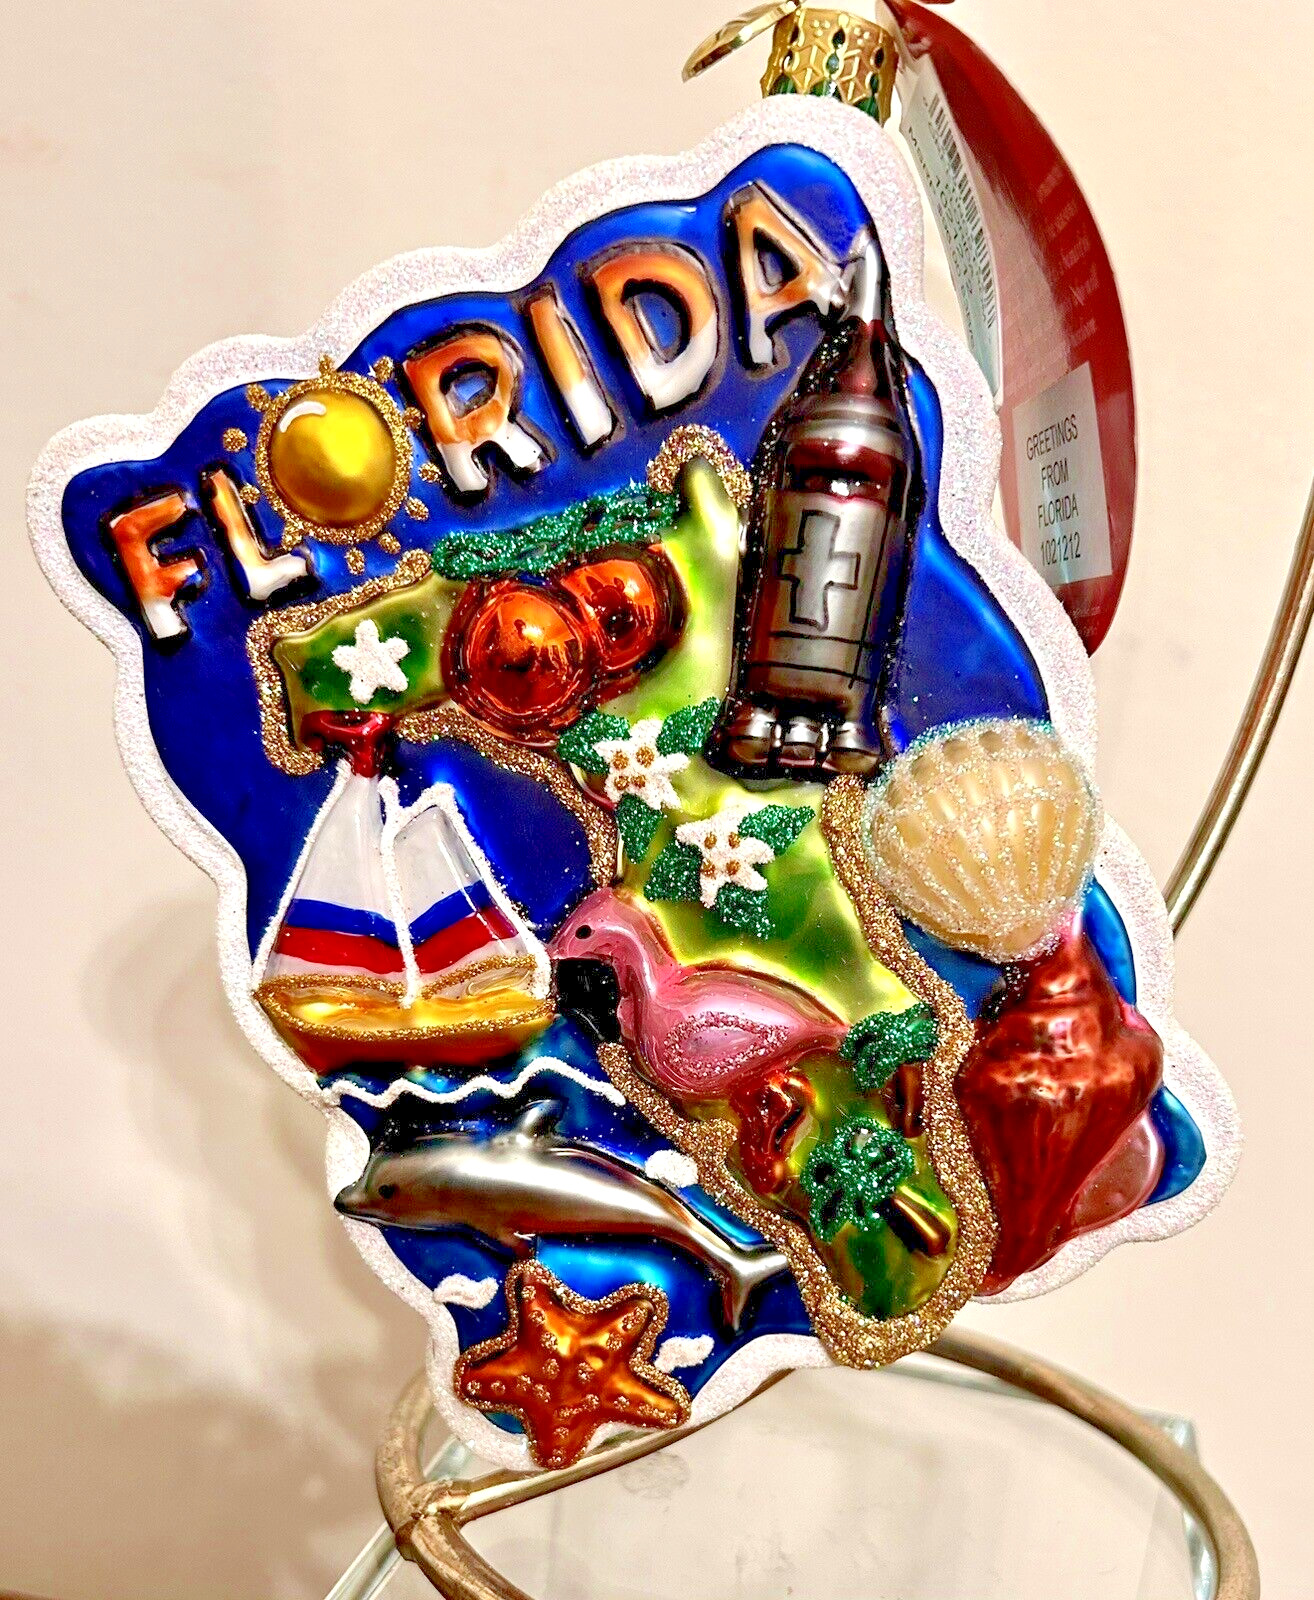 NWT Christopher Radko “Greetings From Florida” Glass Ornament #1021212 - 4-1/2\